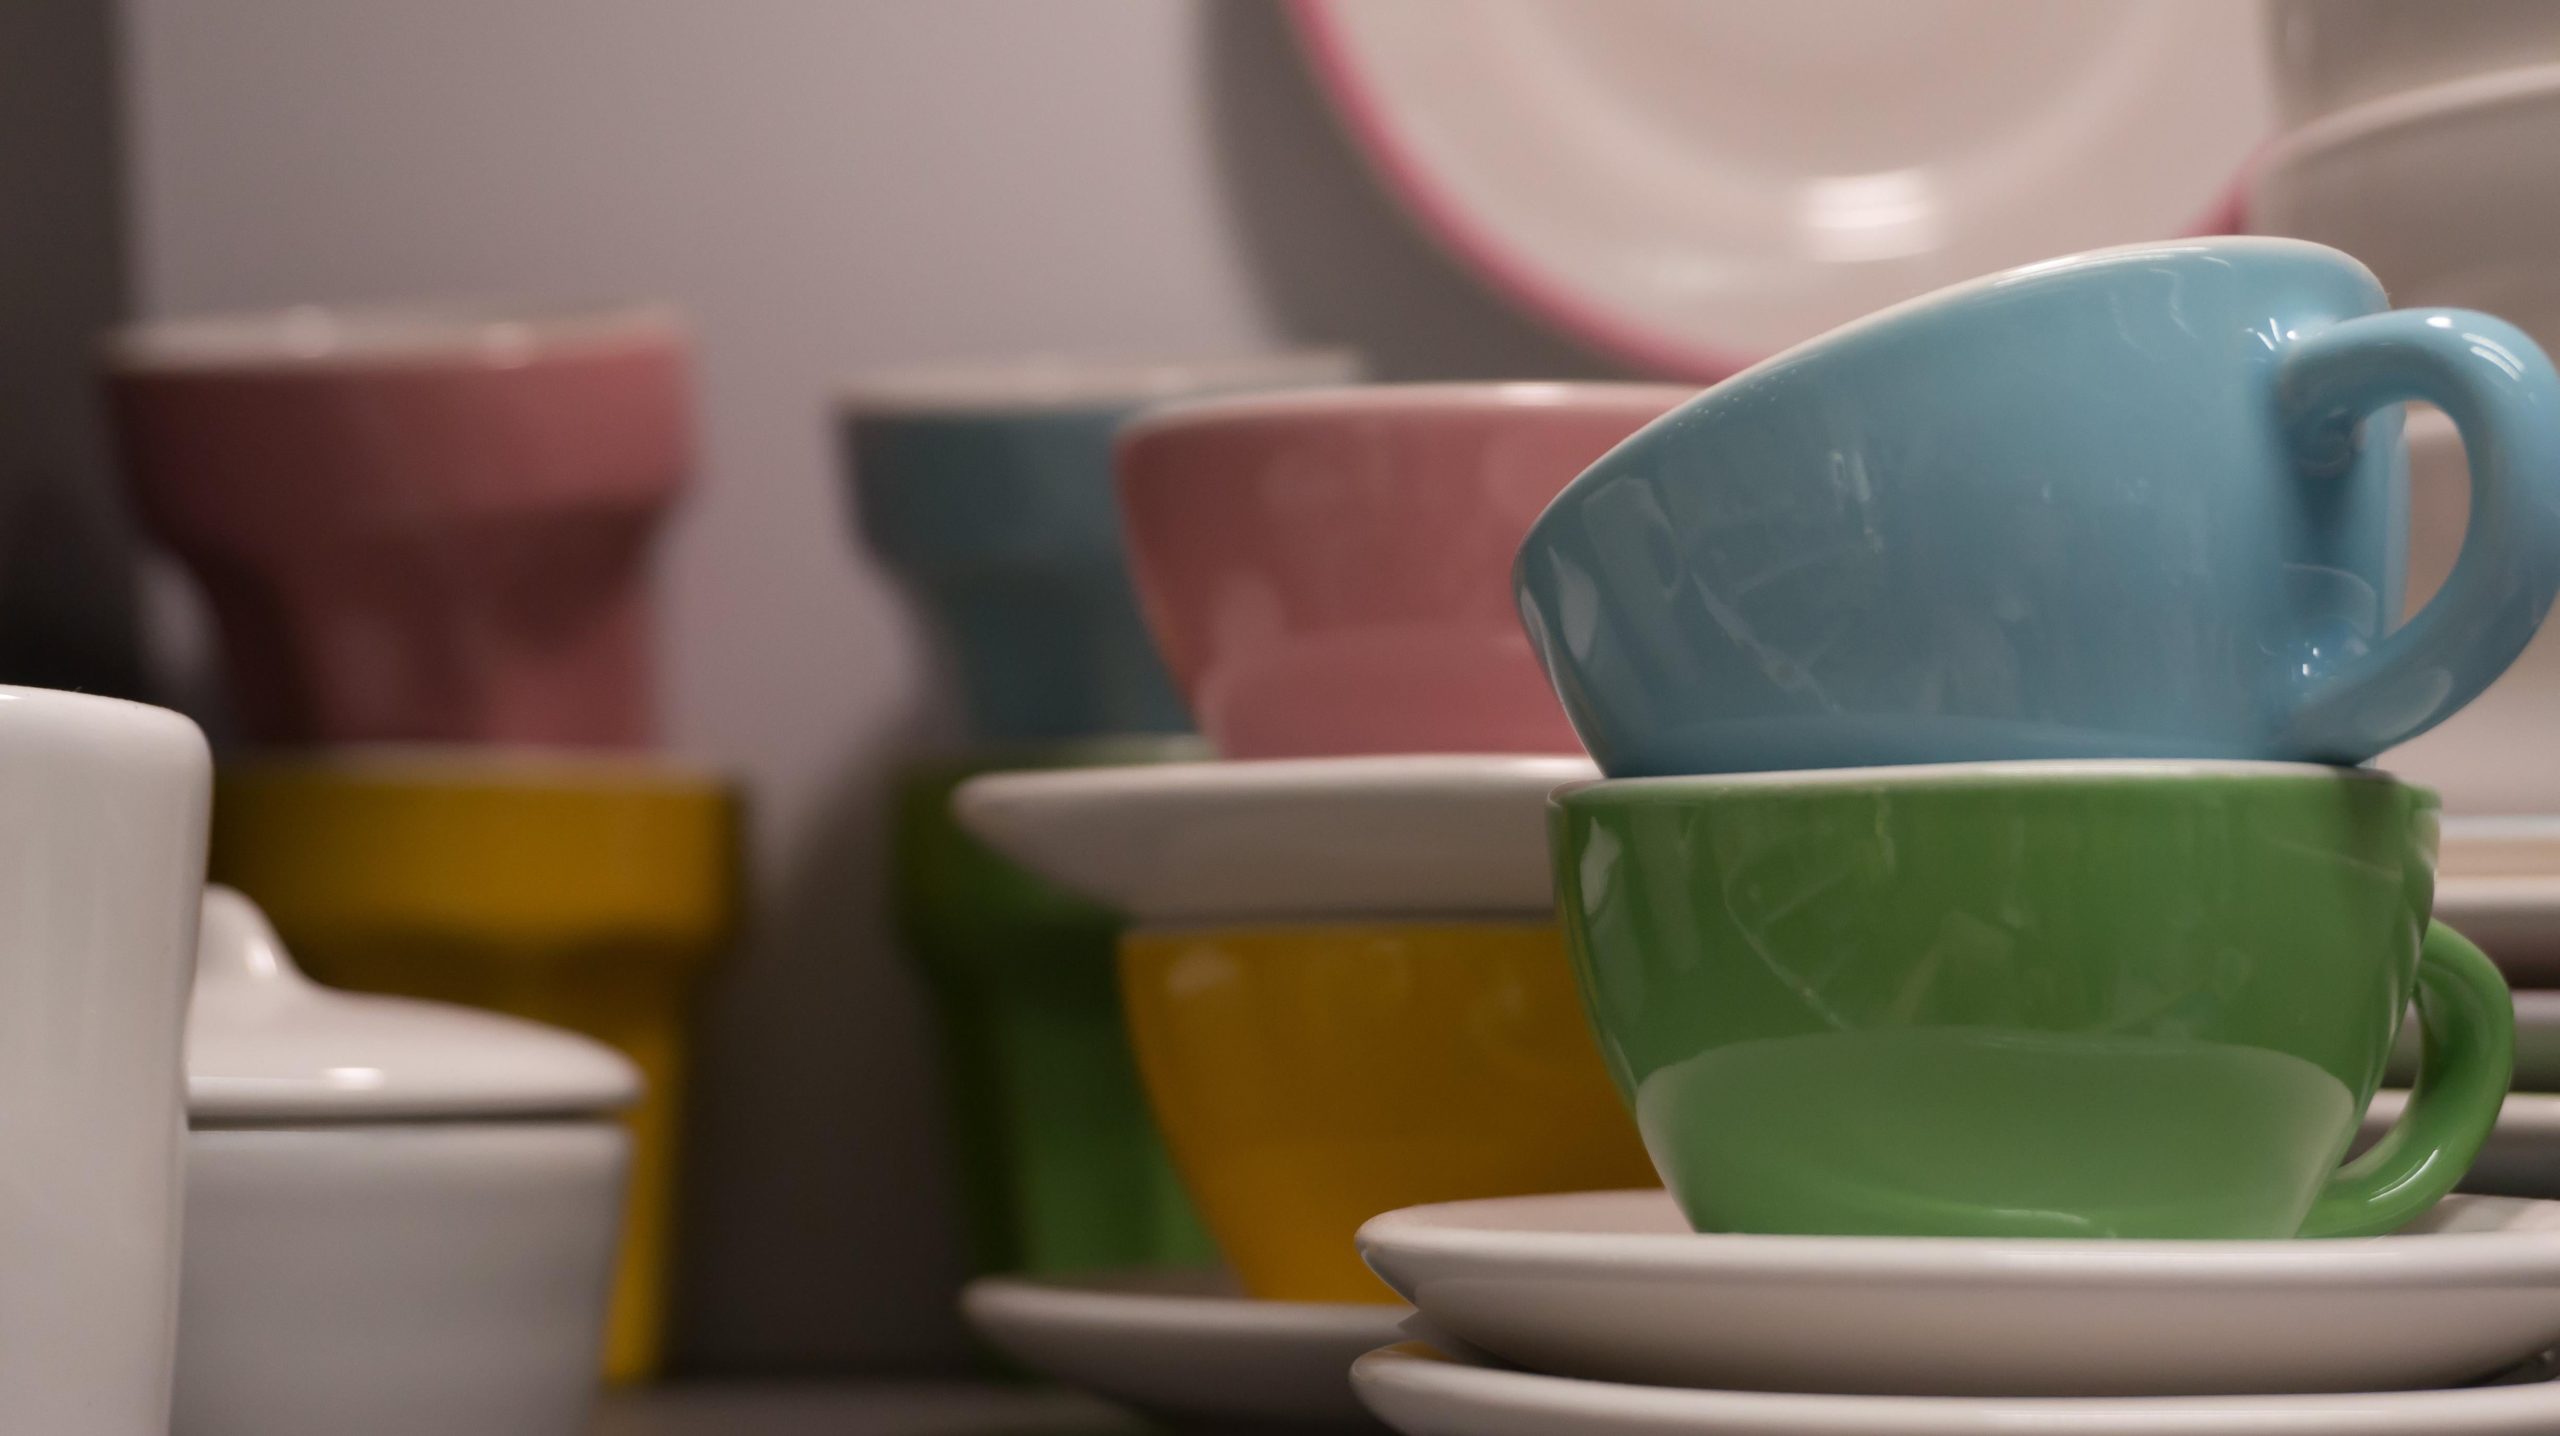 How to Get a Refund for IKEA’s Recalled Dinnerware